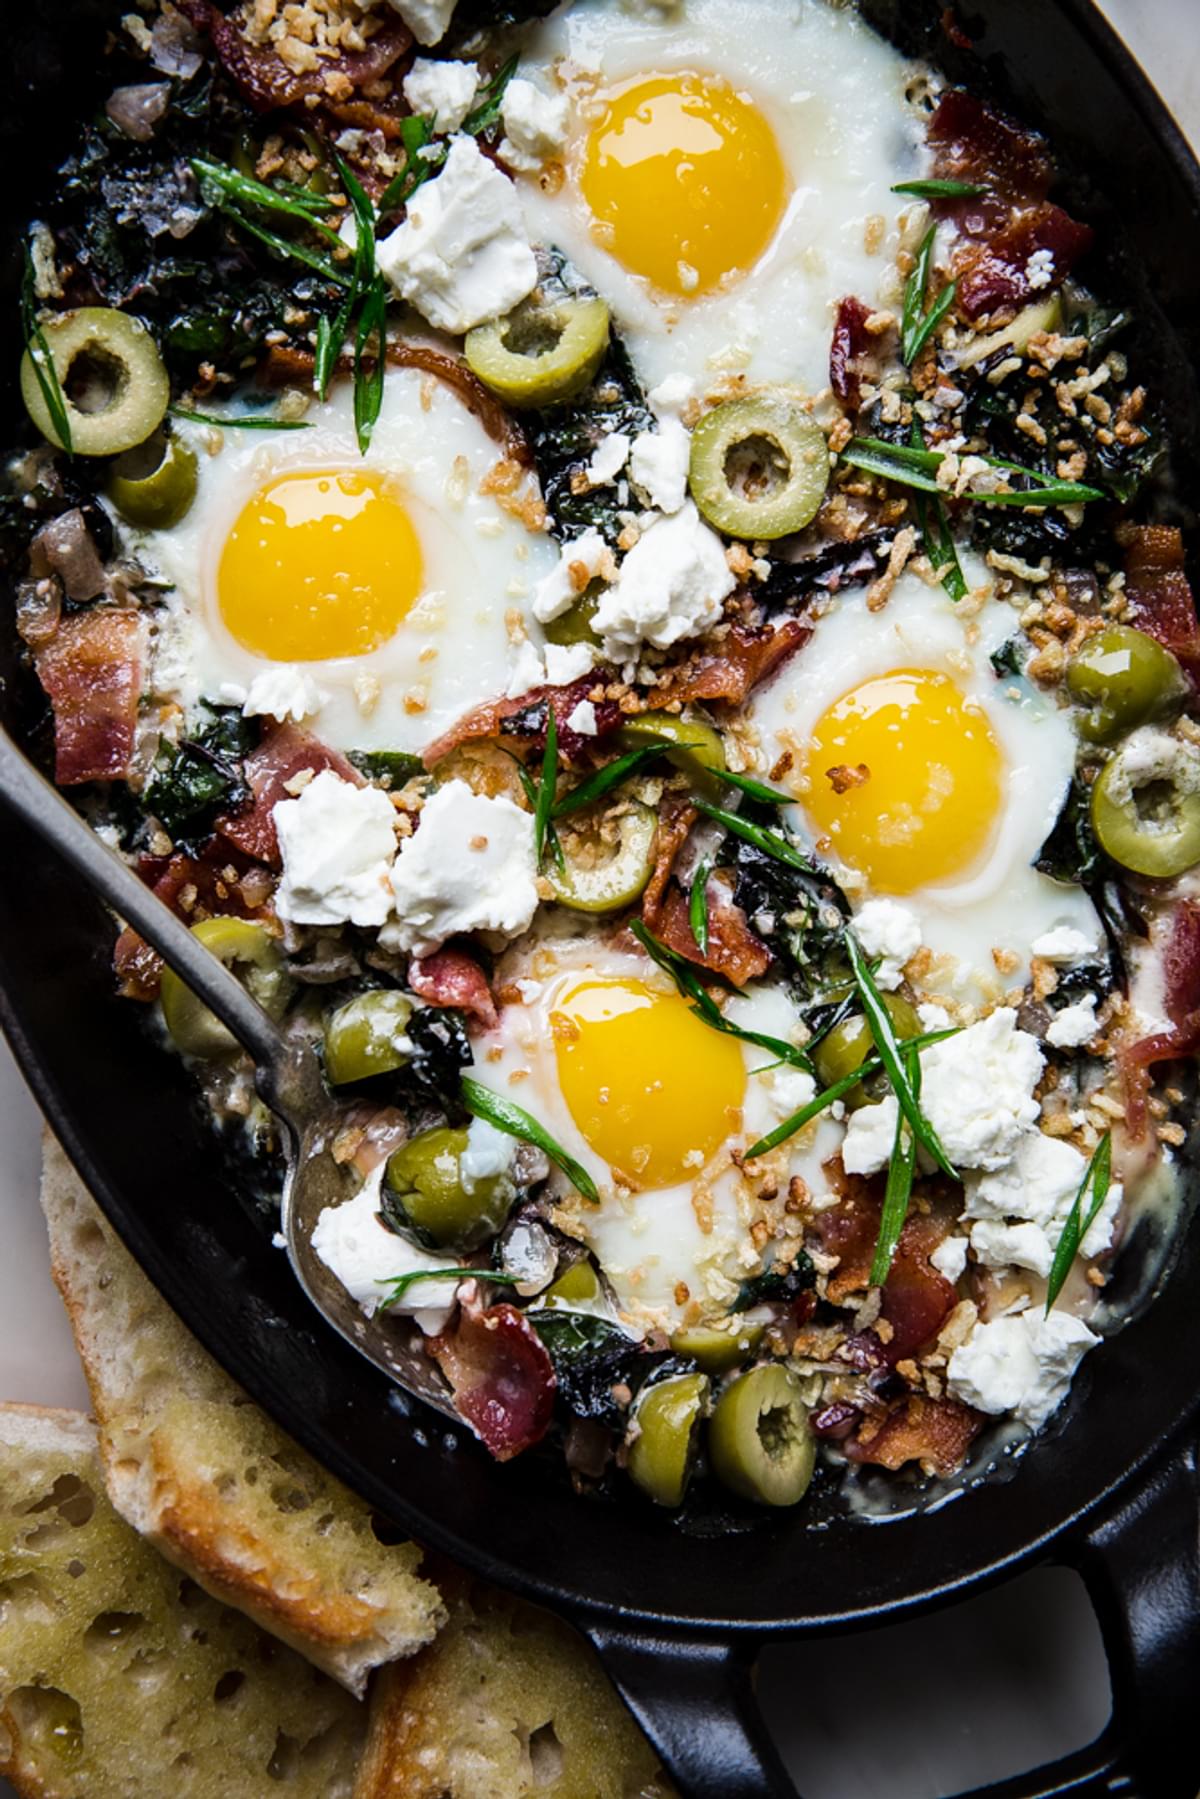 Baked Eggs with Swiss Chard and Green Olives cream and serves with crusty bread